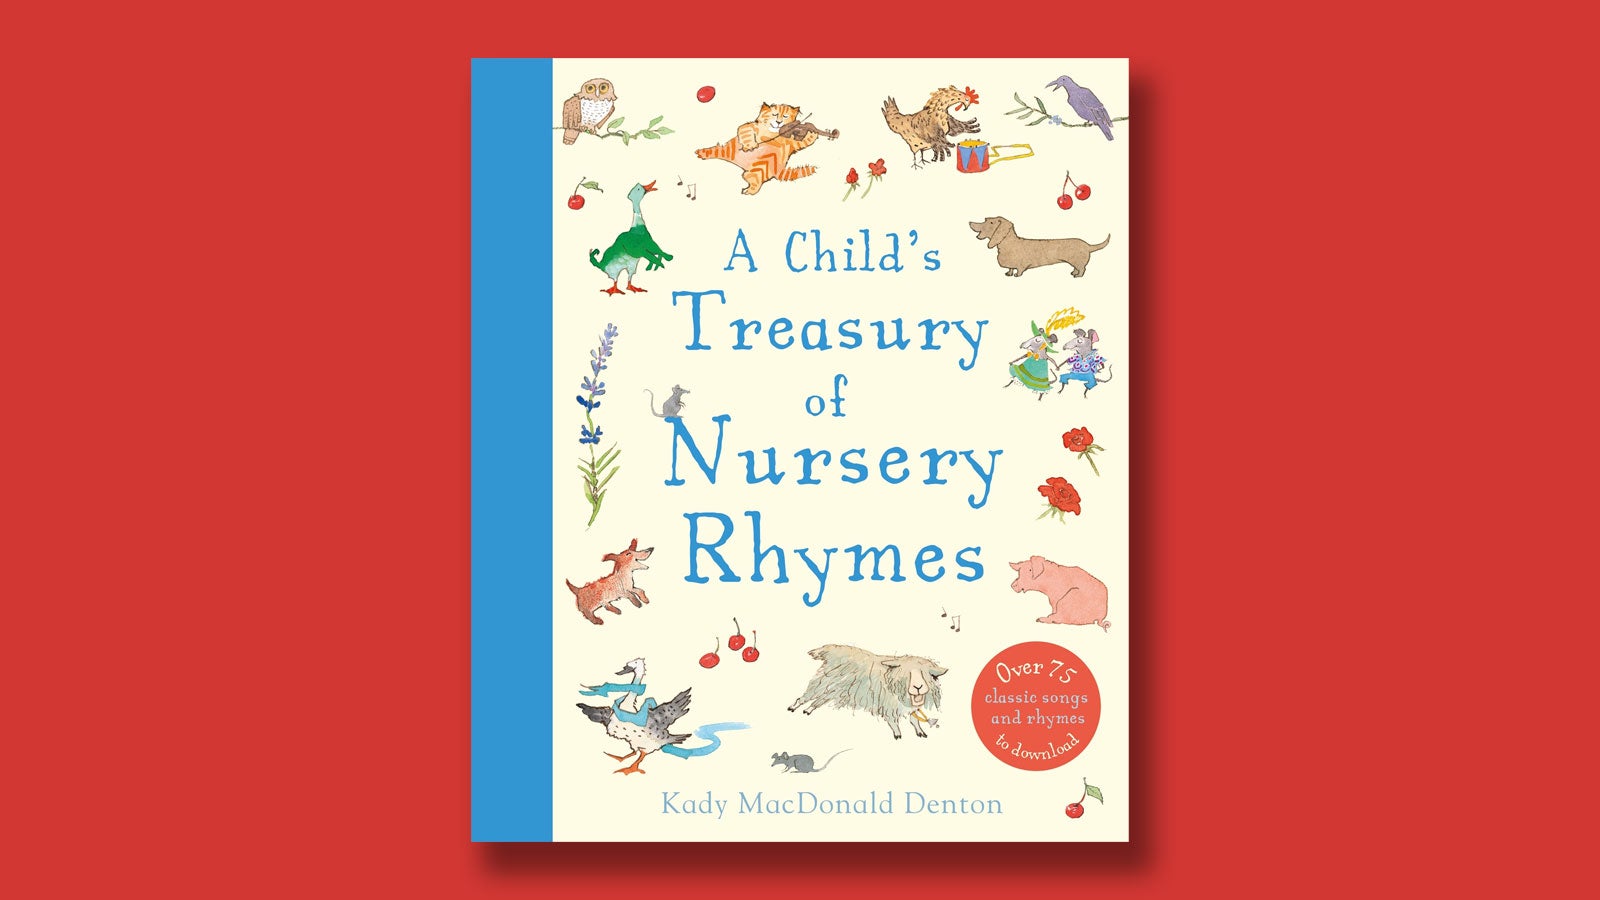 A Child's Treasury of Nursery Rhymes book cover